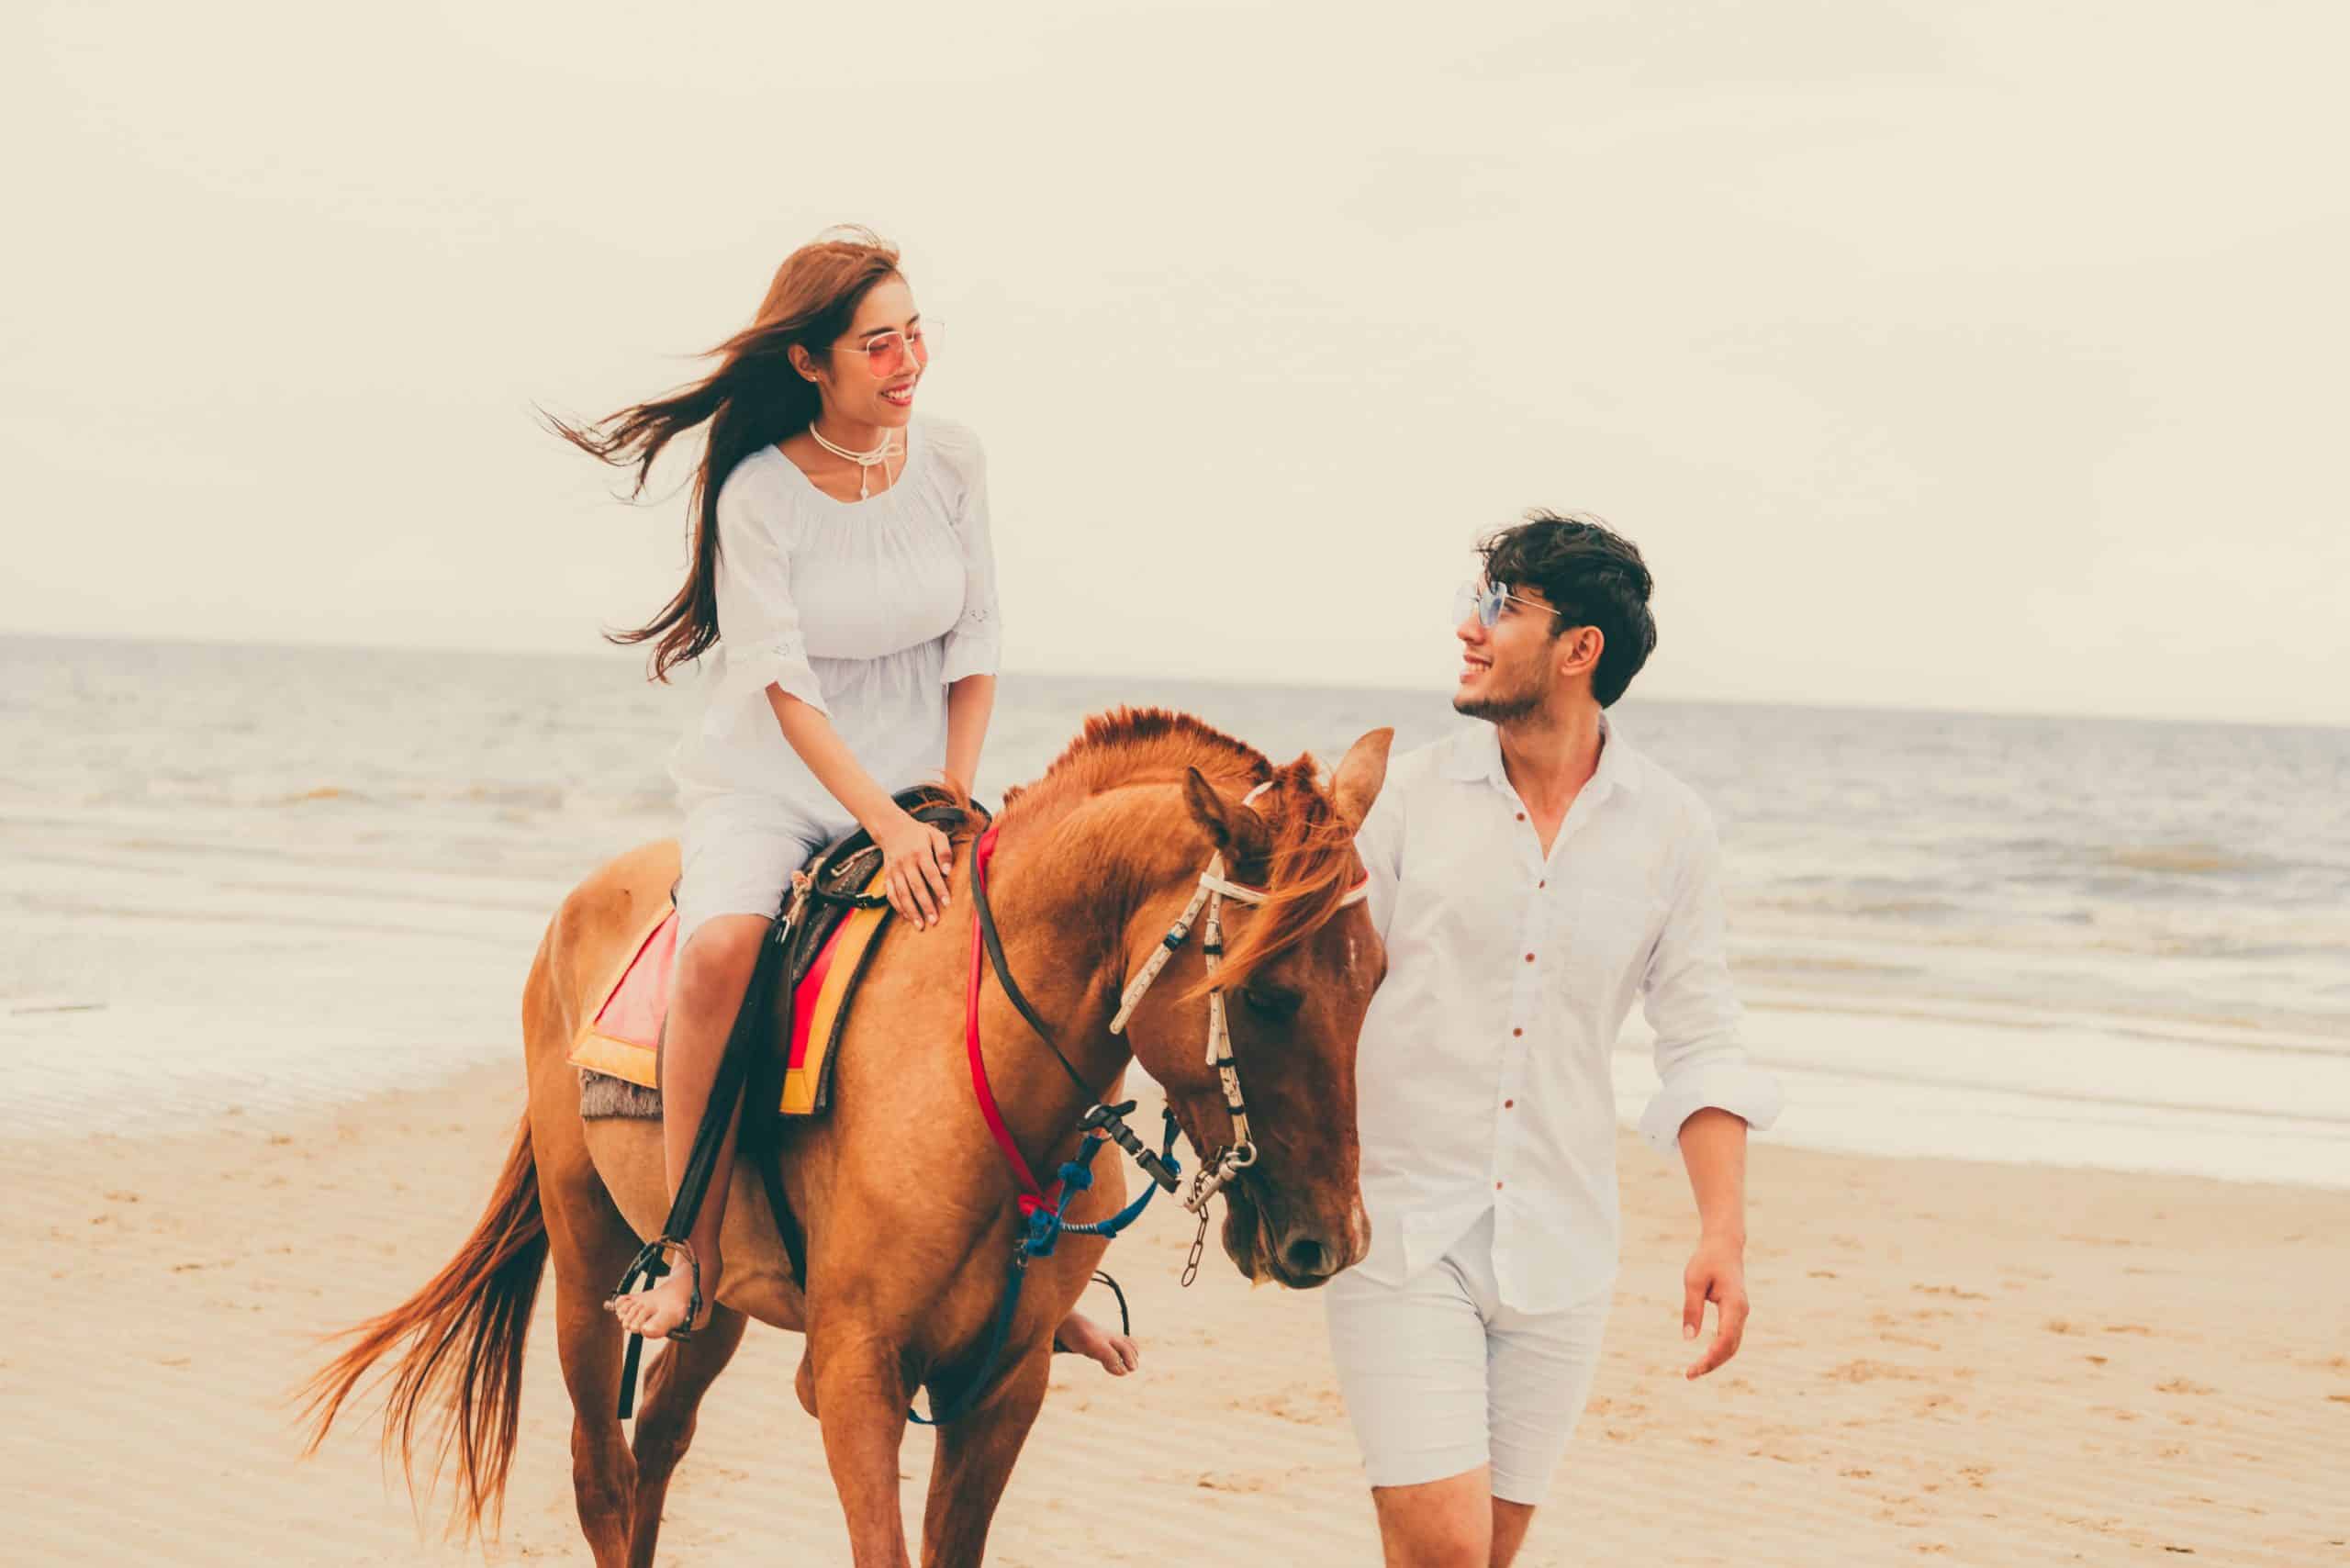 Young couple goes honeymoon horse riding on the beach in summer vacation.